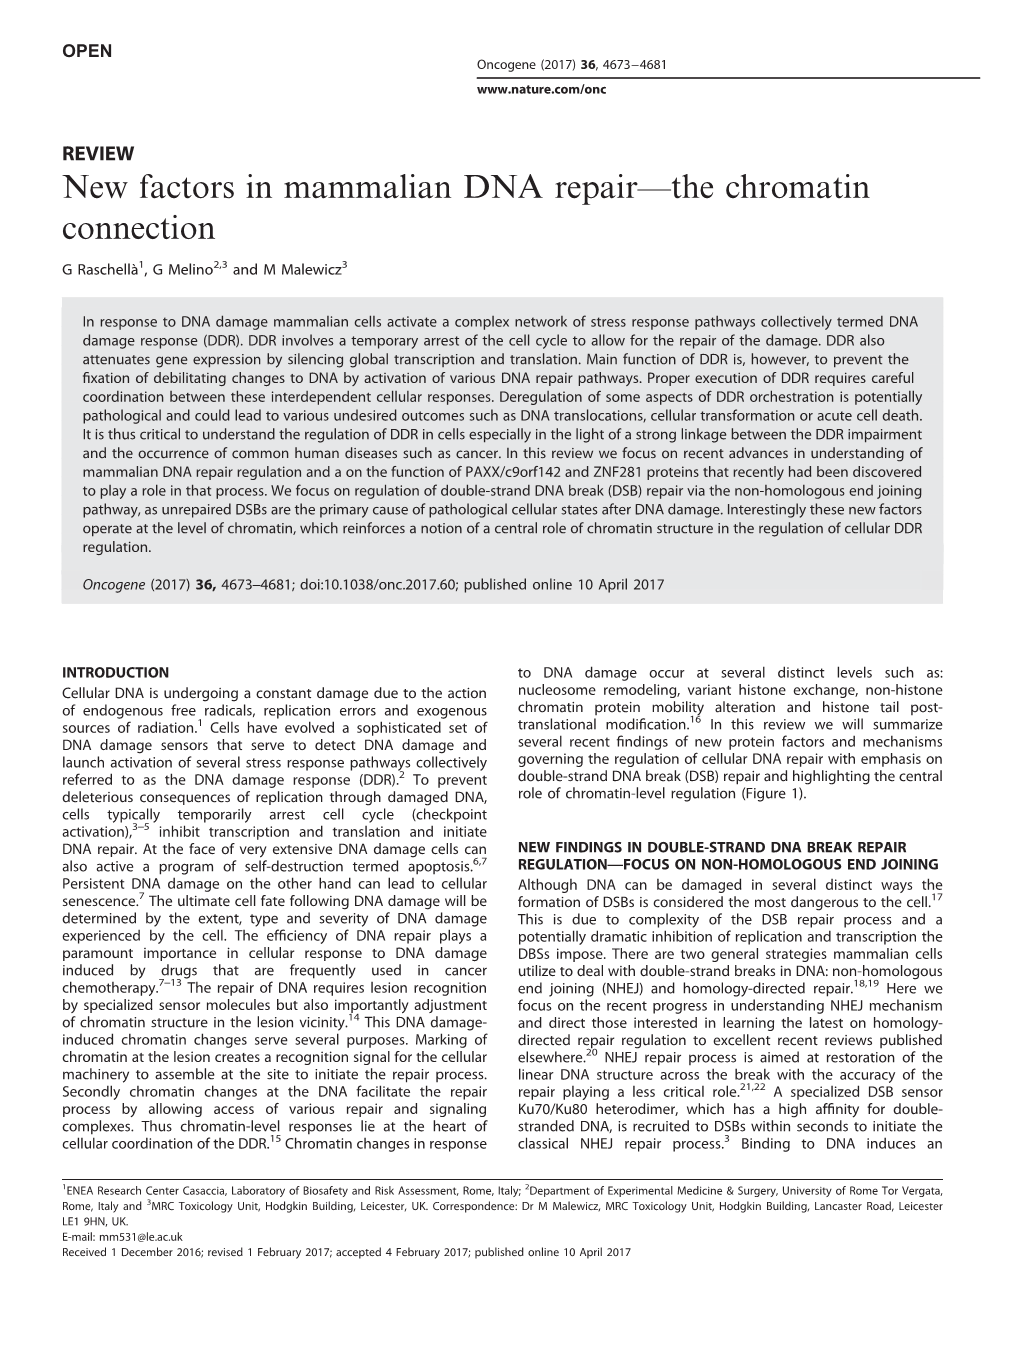 New Factors in Mammalian DNA Repair—The Chromatin Connection